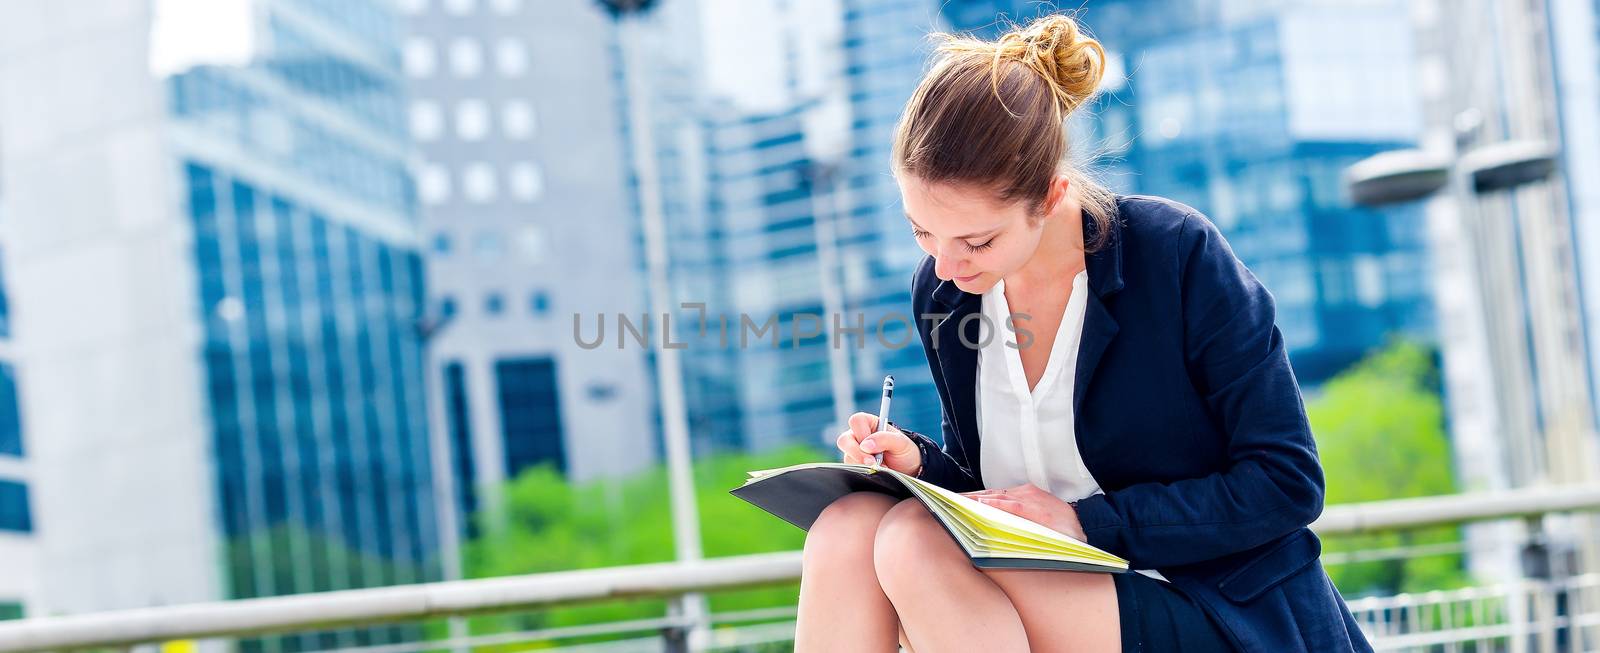 dynamic young executive girl taking notes on her agenda, outside. Symbolizing a job search or a trade of outsourcing